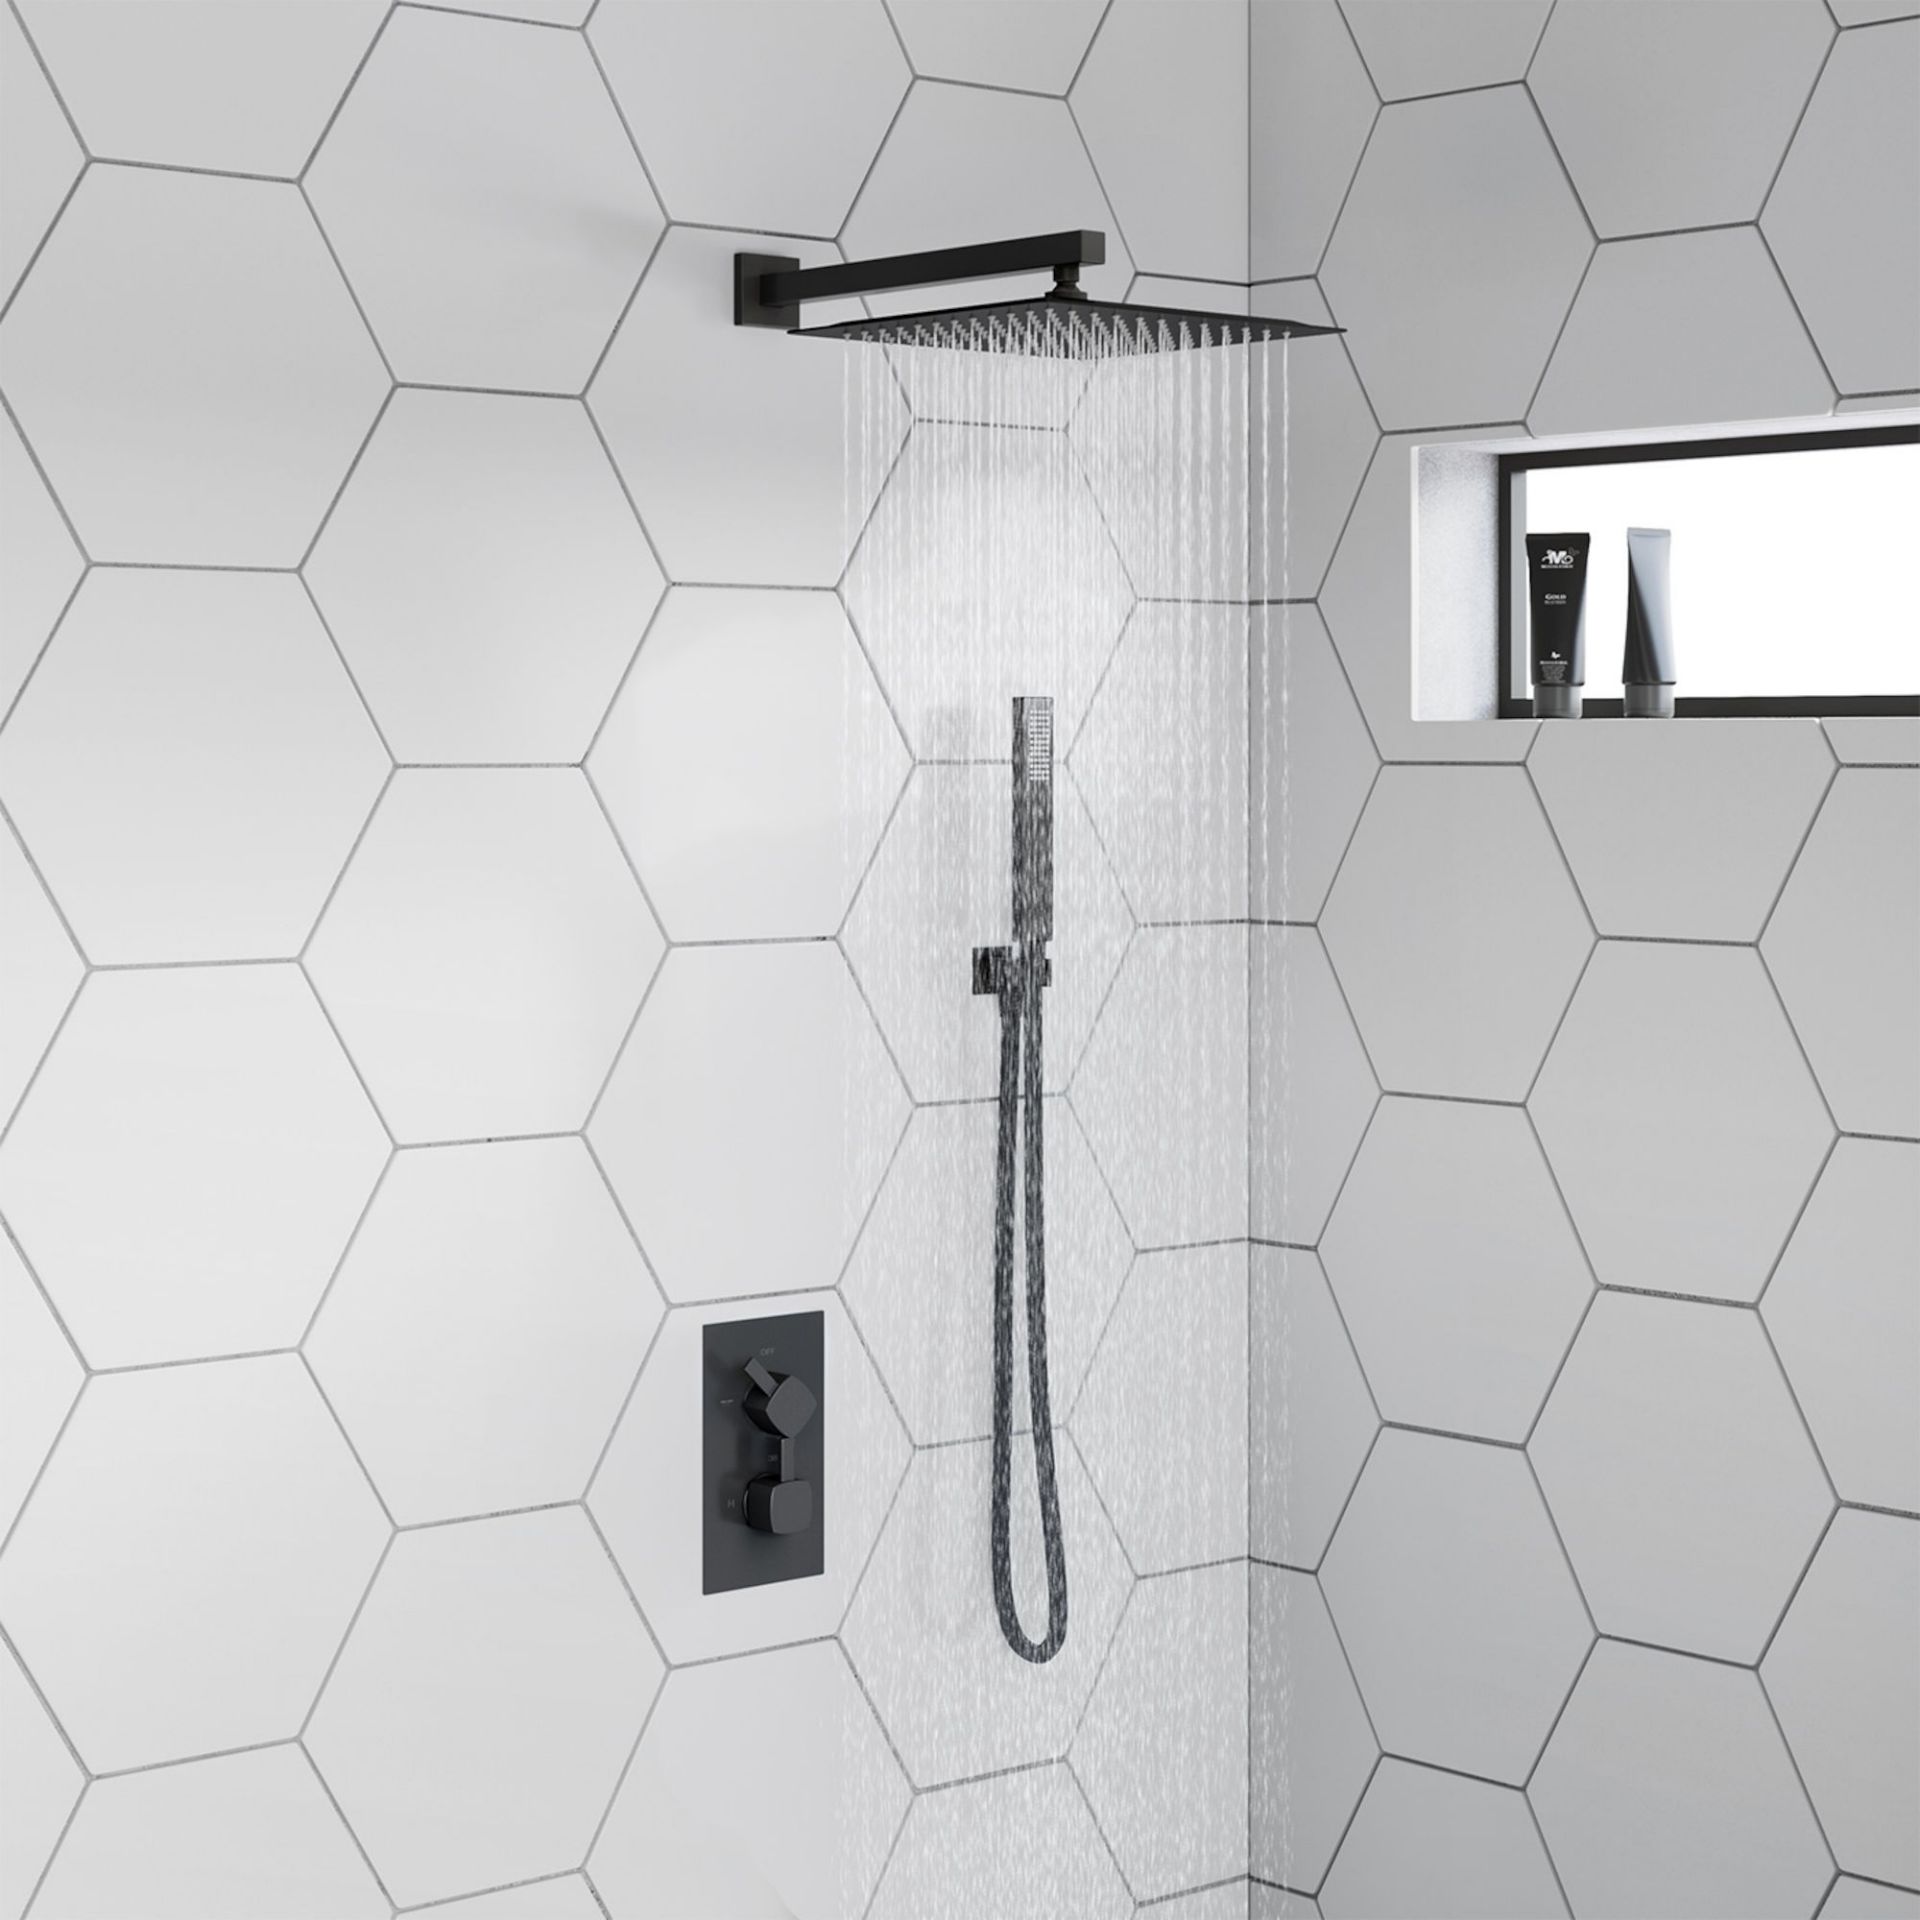 (HP250) Matte Black Square Concealed Thermostatic Mixer Shower Kit & Large Head. RRP £474.99.